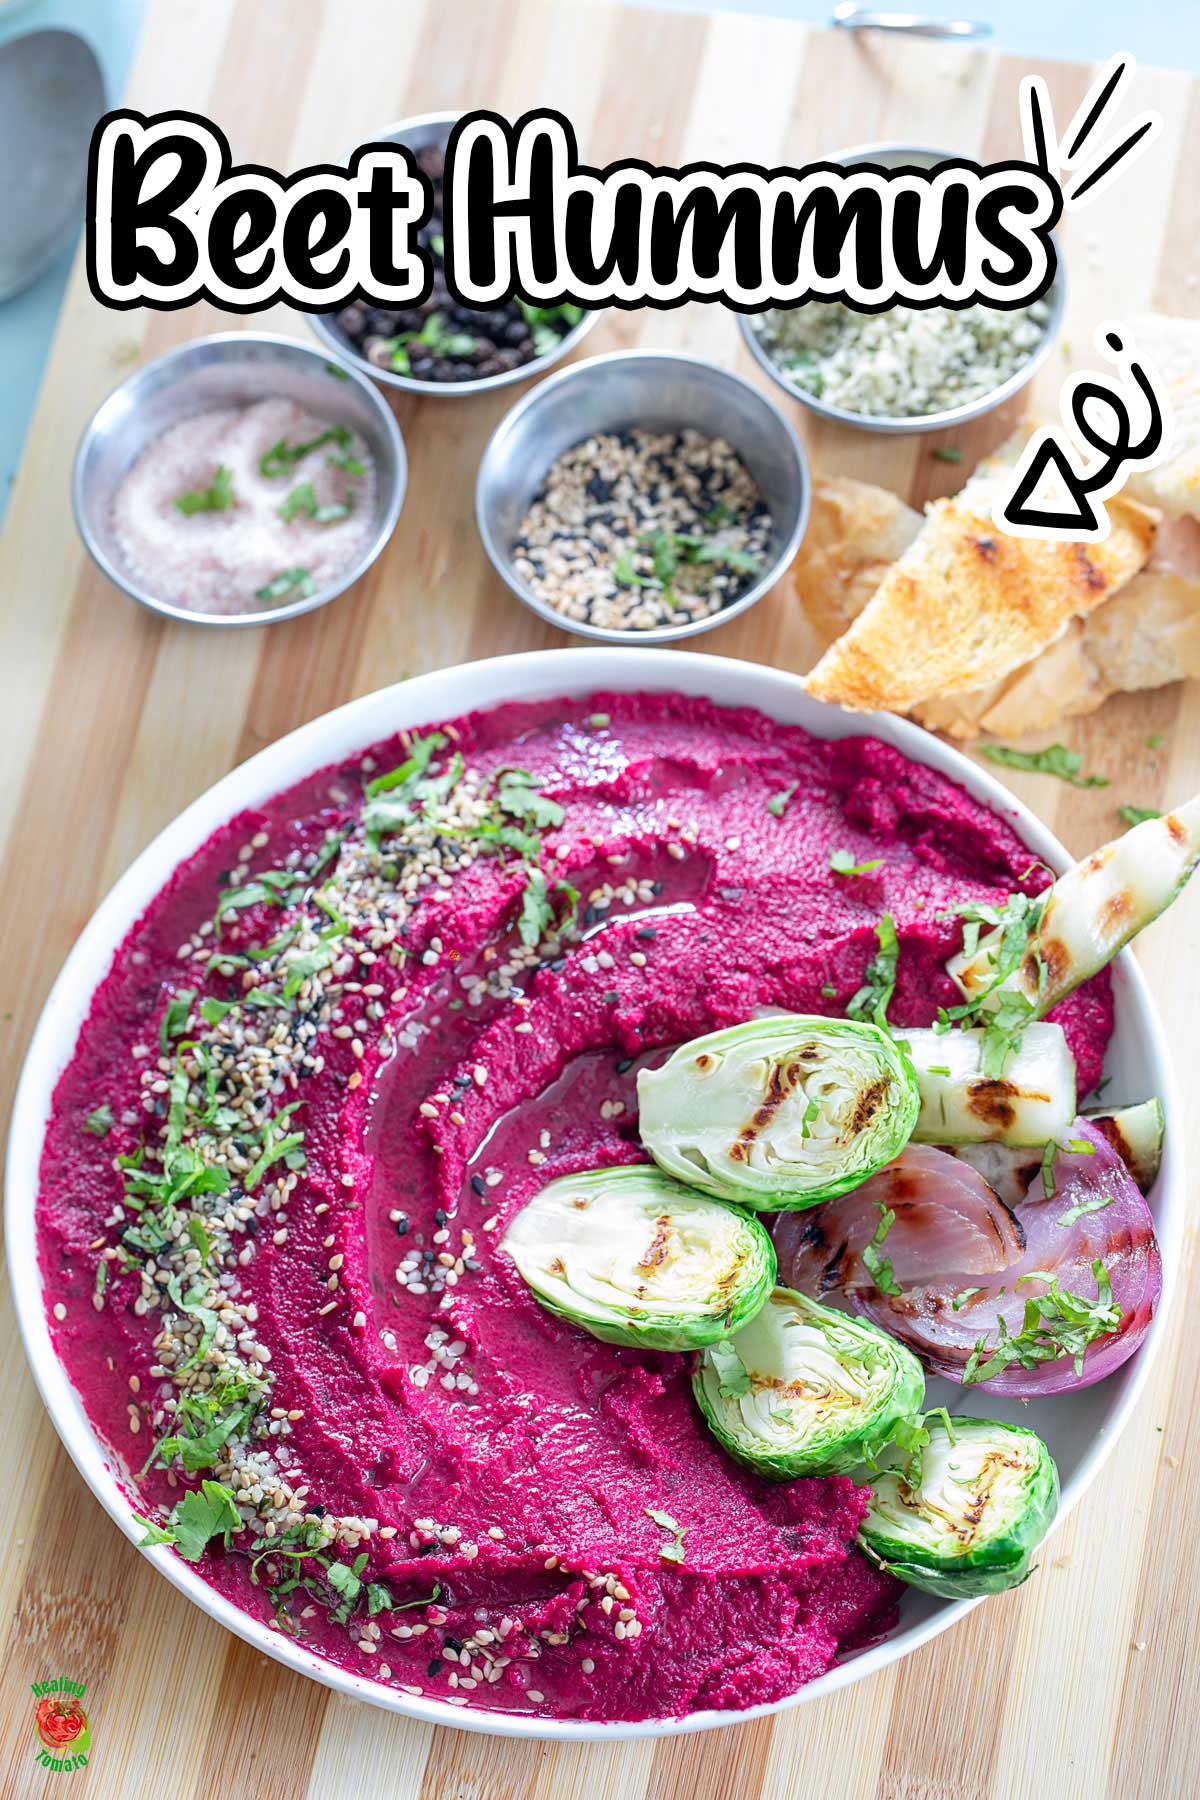 Top view of a bowl filled with vibrant magenta colored hummus. Hummus is garnished with seeds and cilantro. On the side, there are grilled veggies.